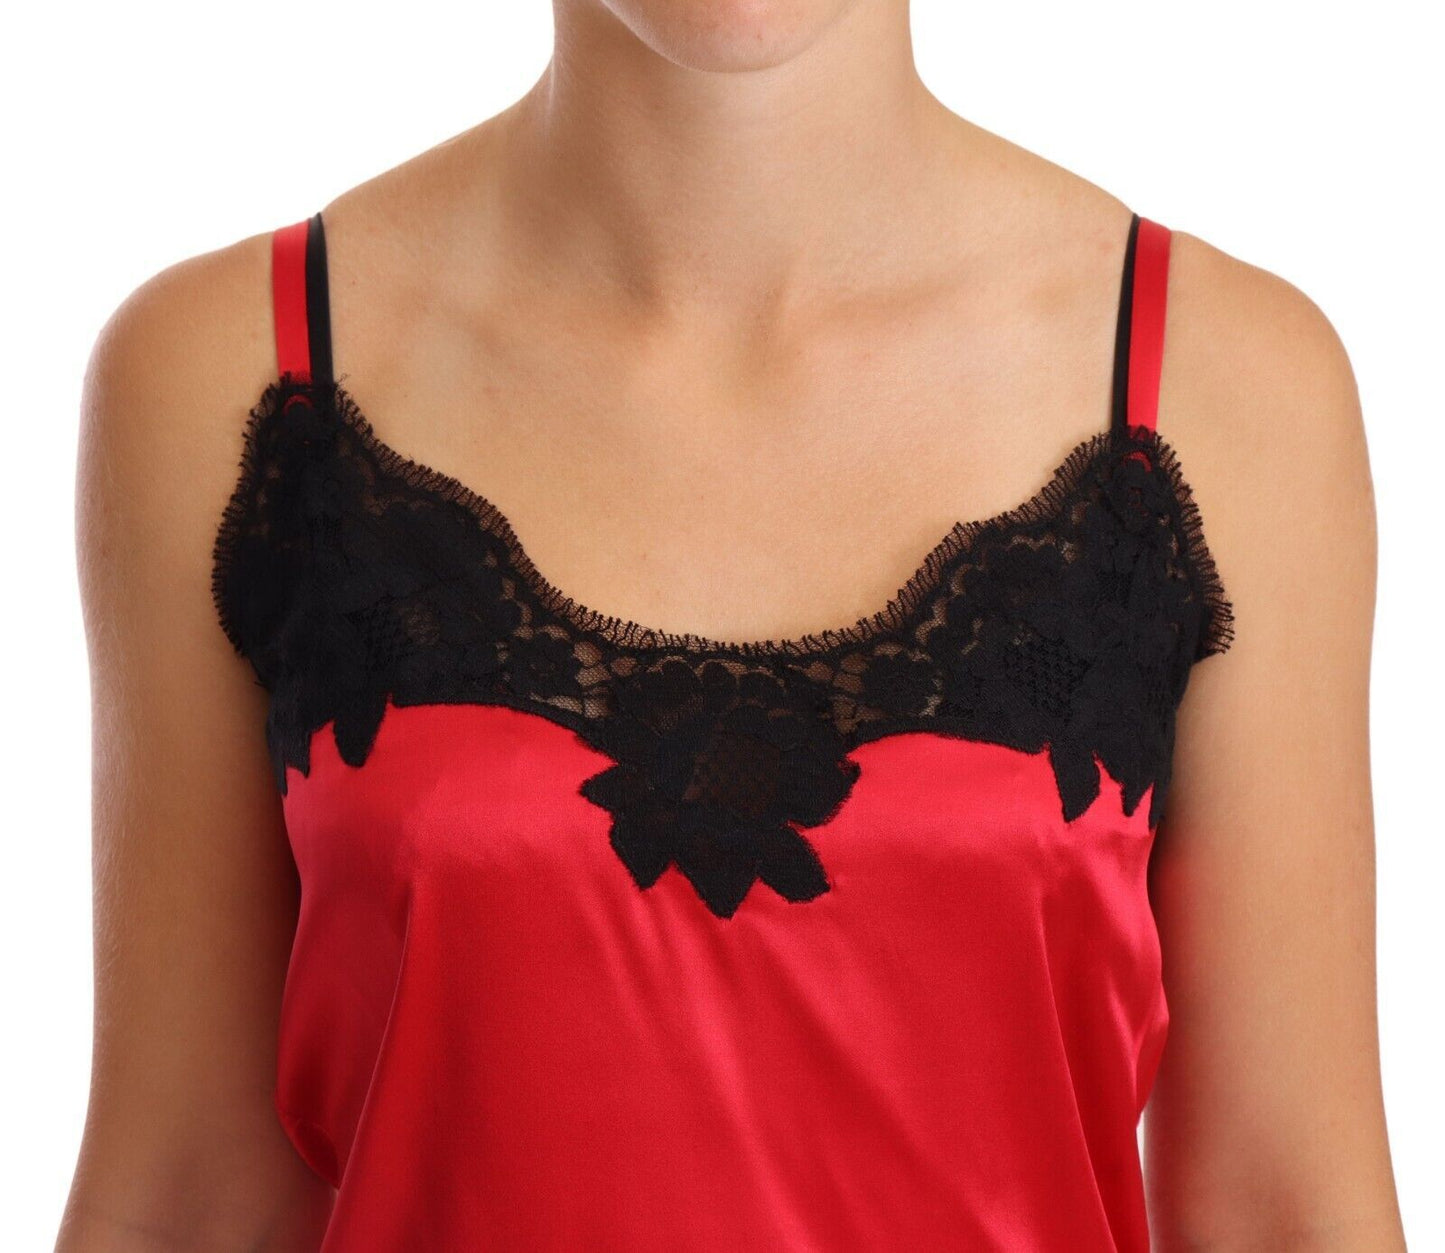 Dolce & Gabbana Red Floral Lace Silk Satin Camisole Lingerie Top